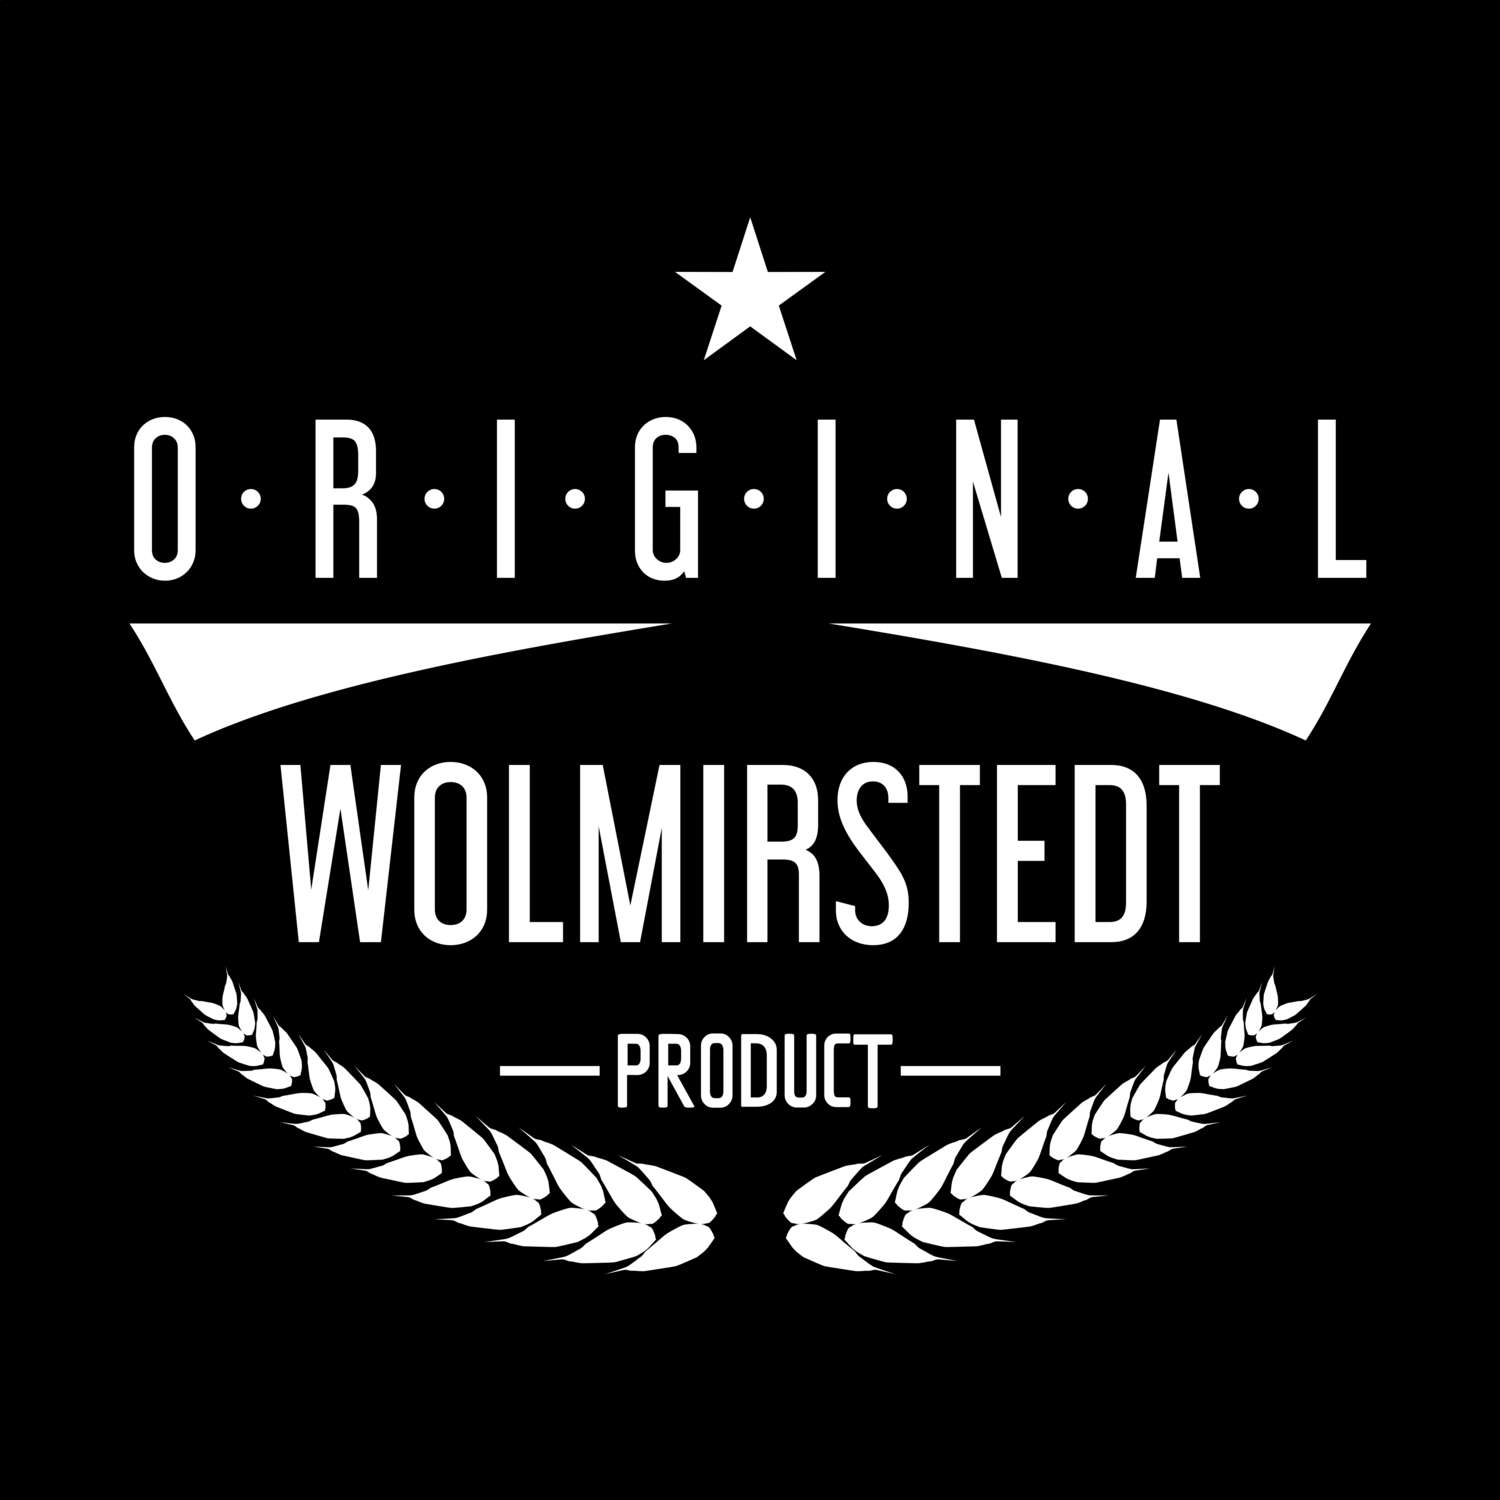 Wolmirstedt T-Shirt »Original Product«